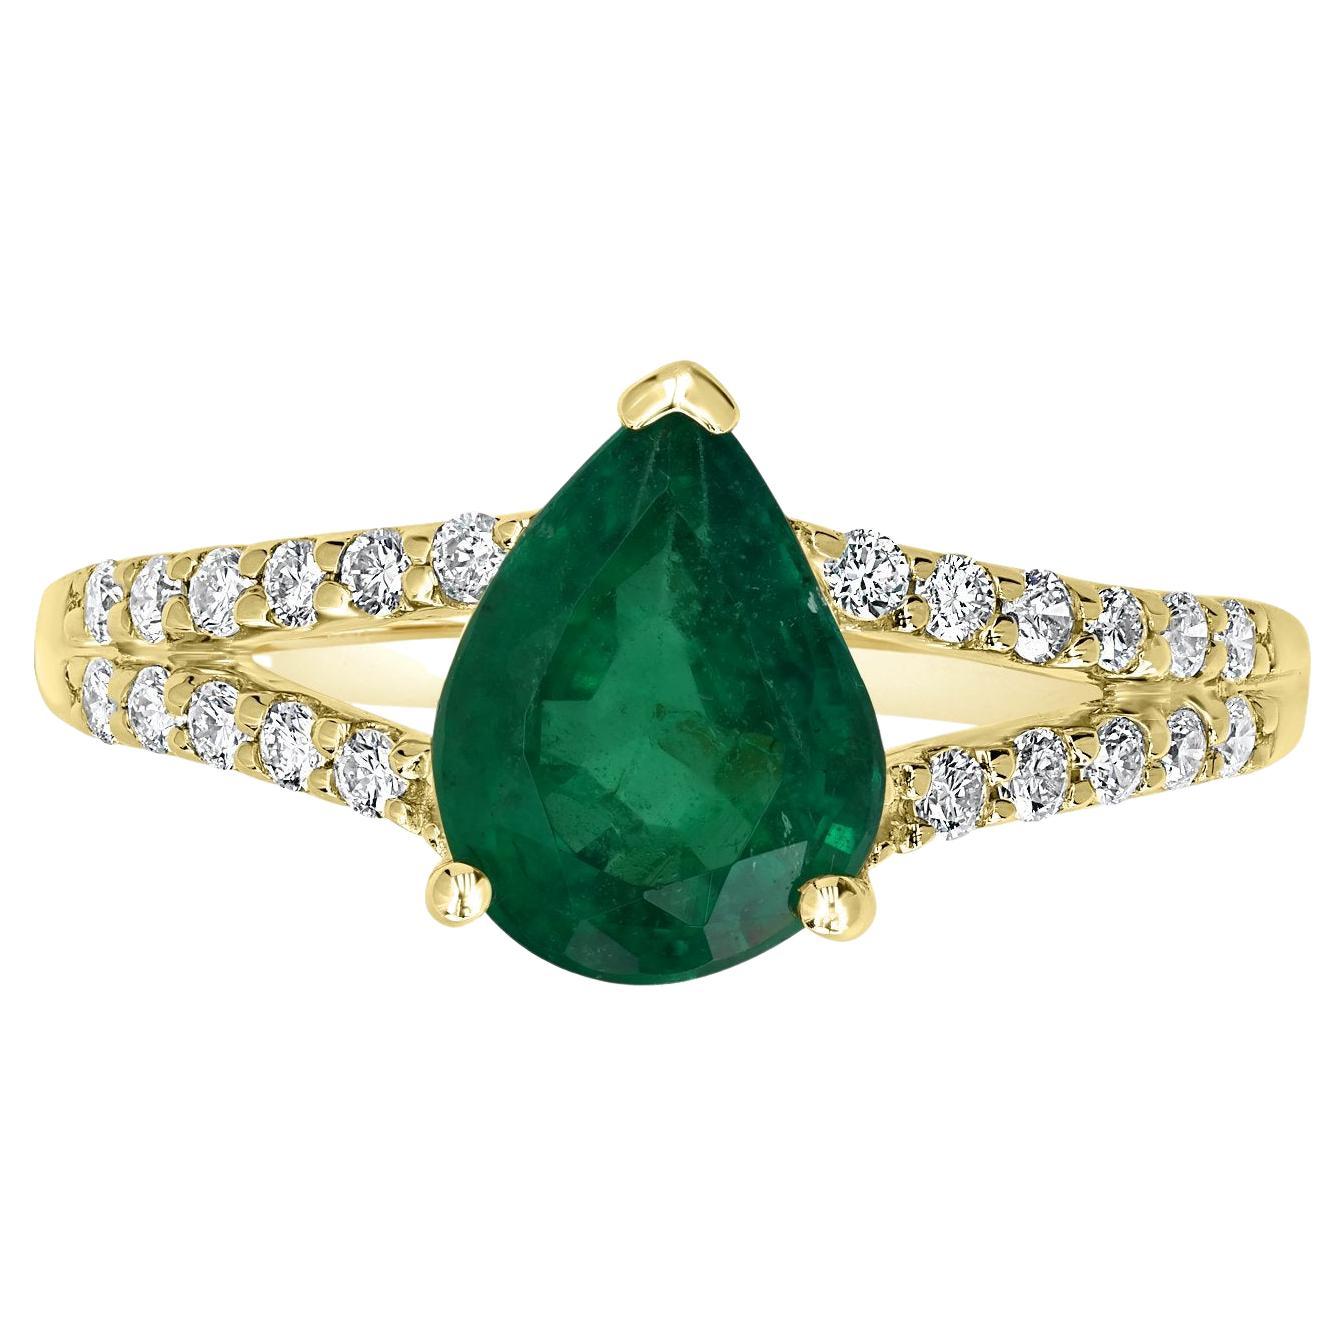 1.43ct Emerald Ring with 0.22Tct Diamonds Set in 18K Yellow Gold